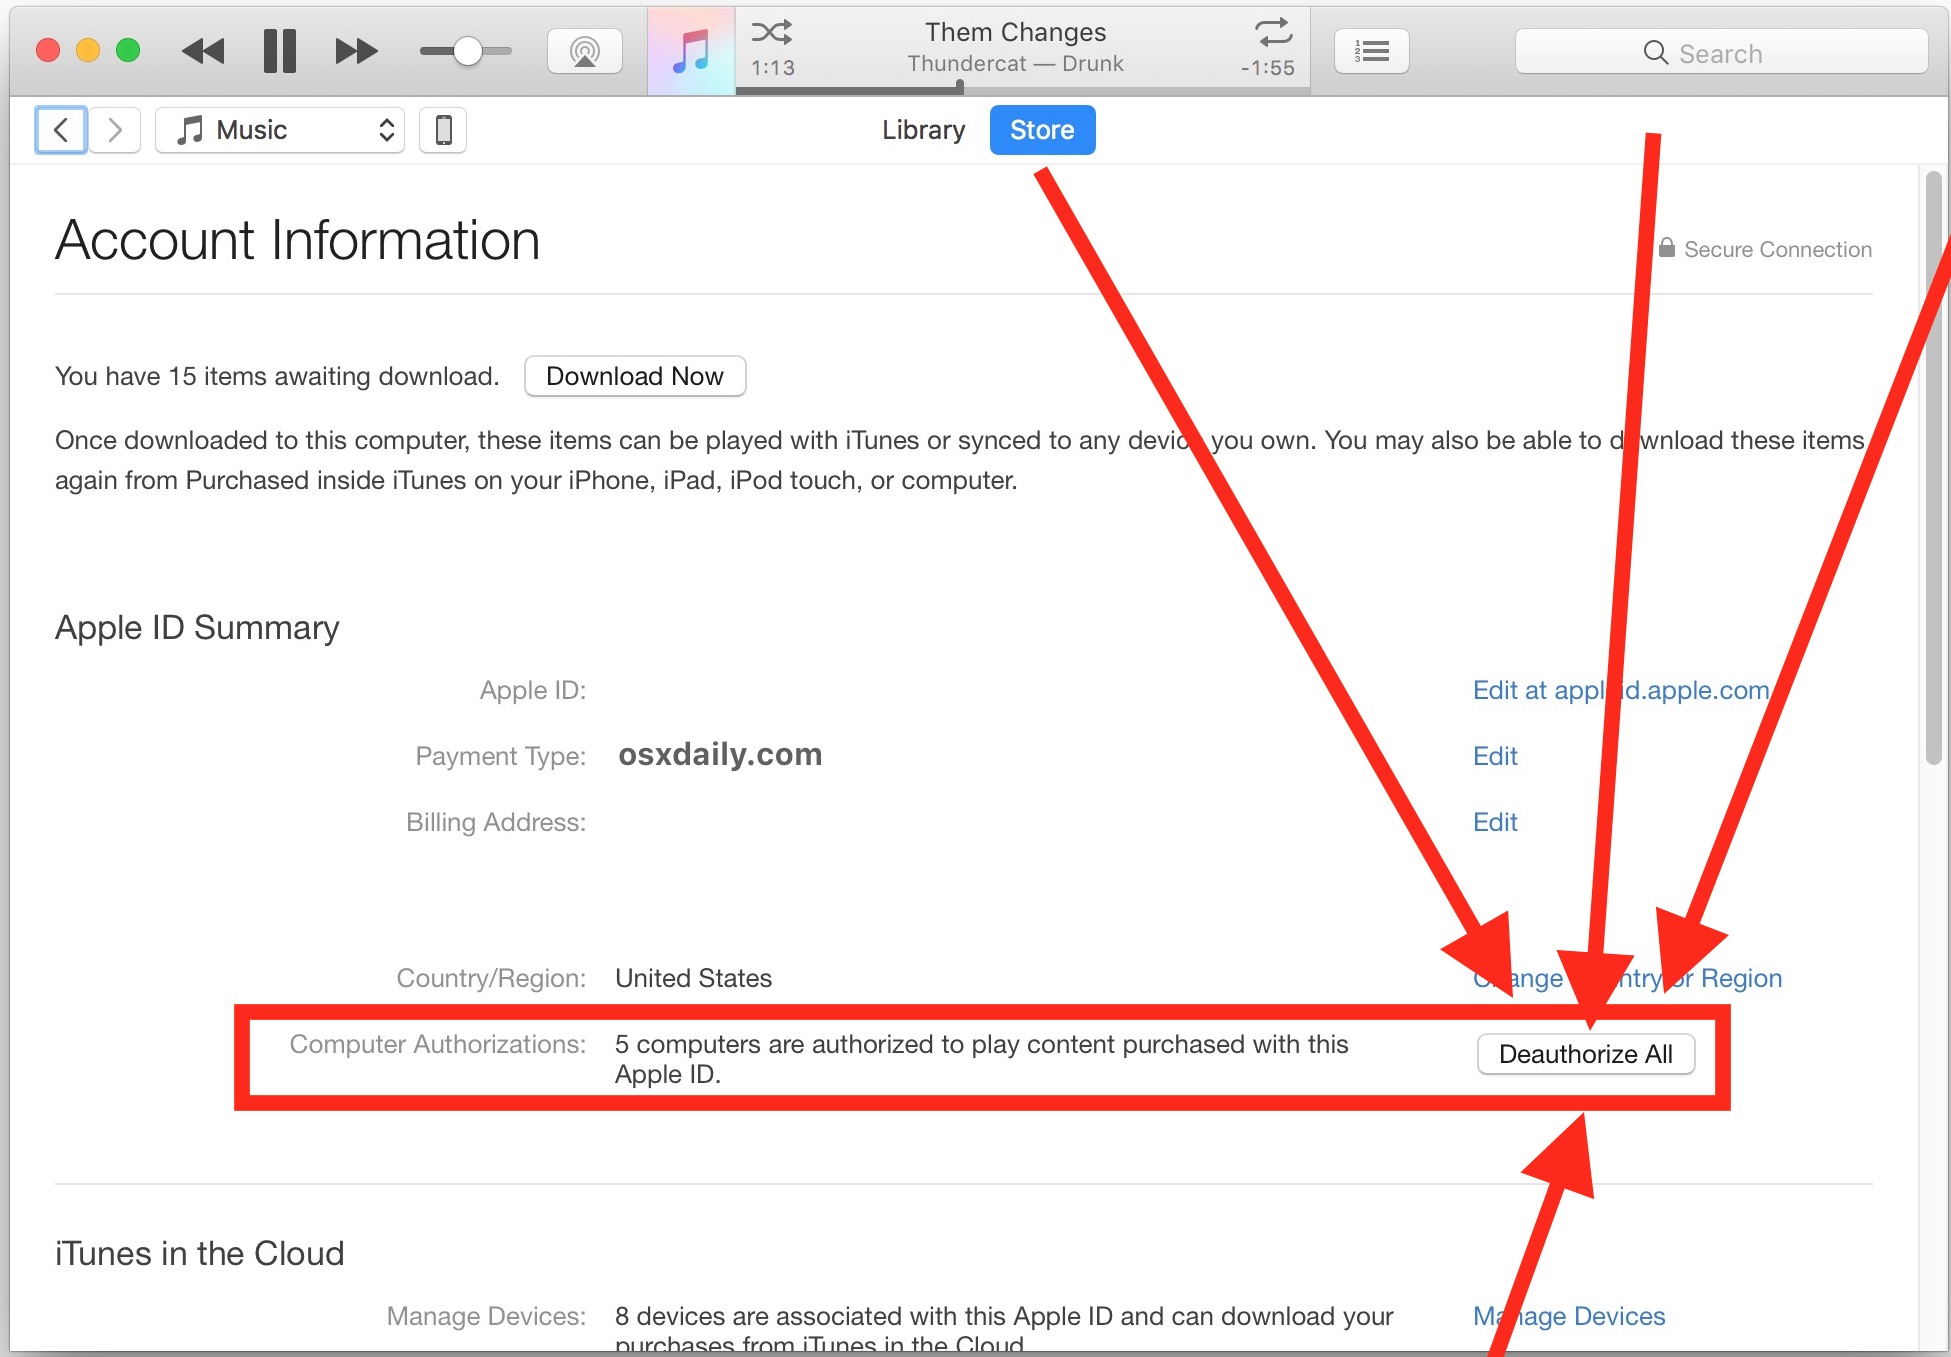 How to deauthorize all computers in iTunes on Mac or PC